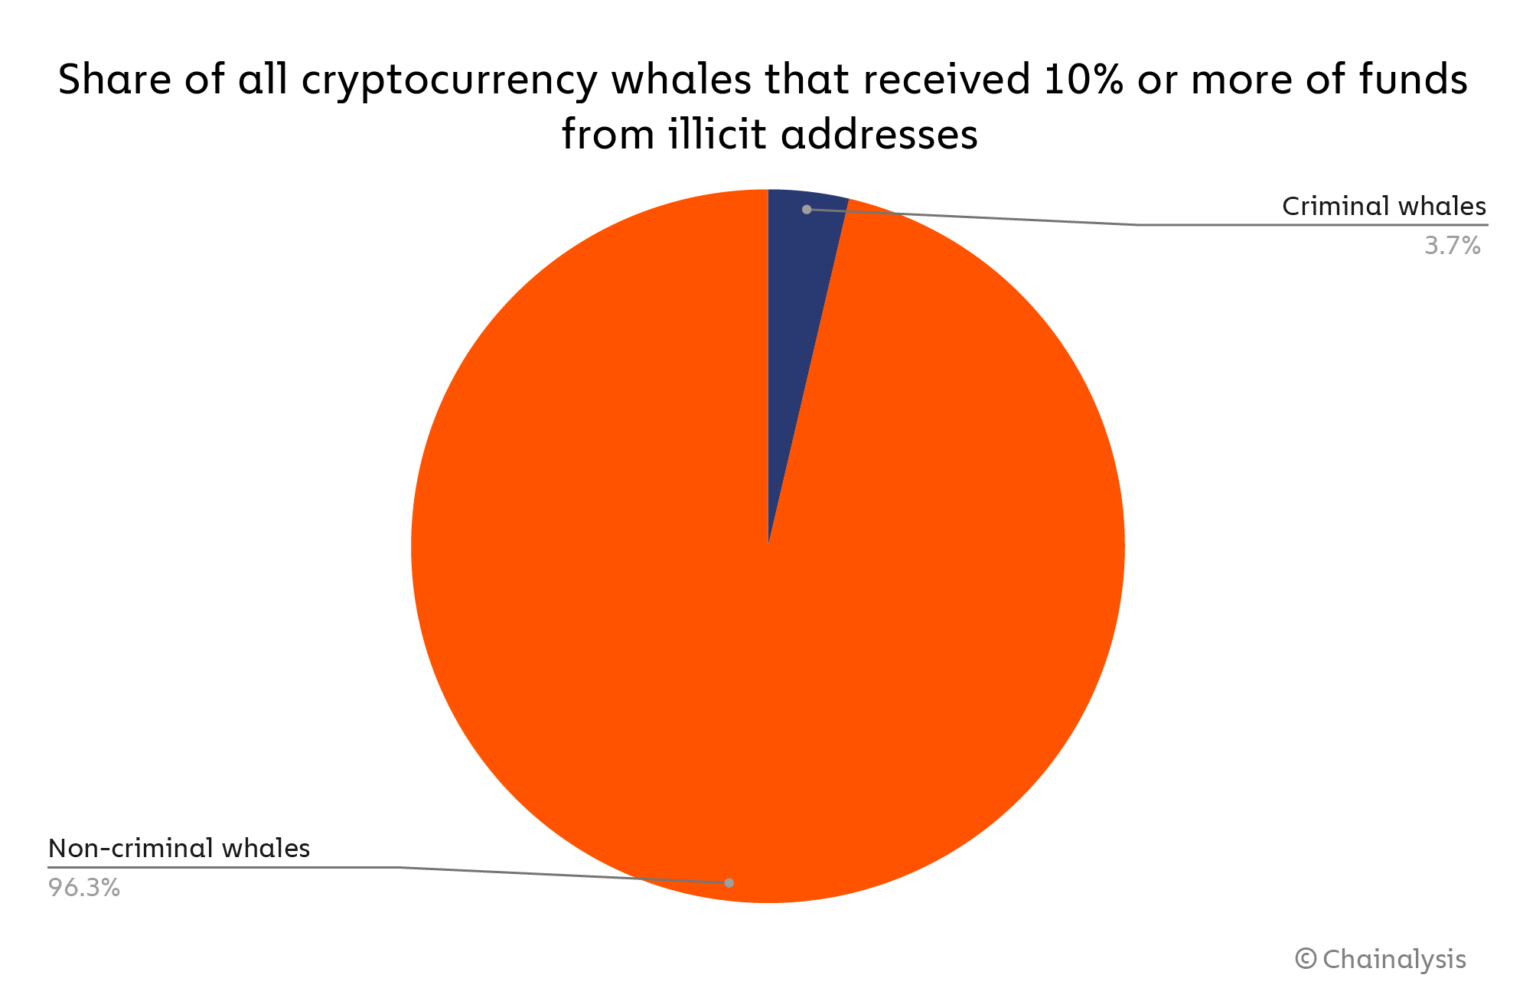 Chainalysis study shows 'criminal whales' hold $25 billion in digital assets, entities account for 3.7% of all crypto whales